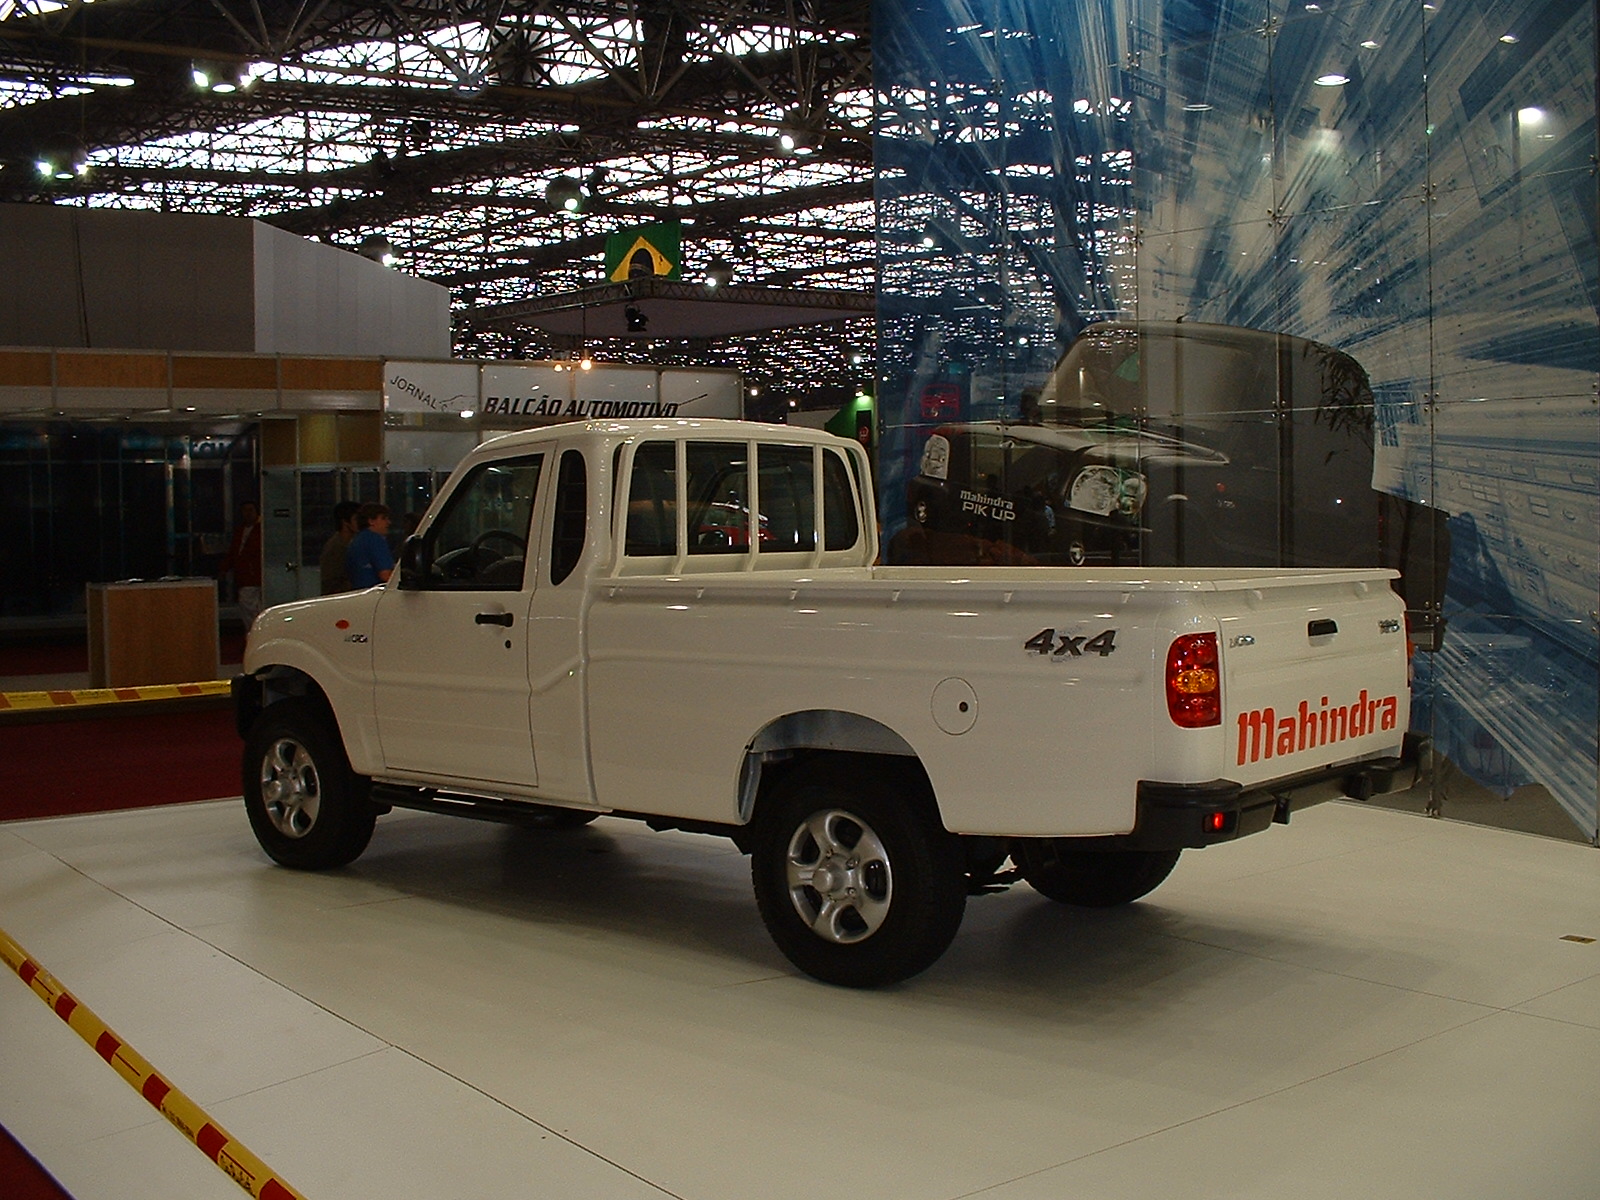 an truck on display at a trade show